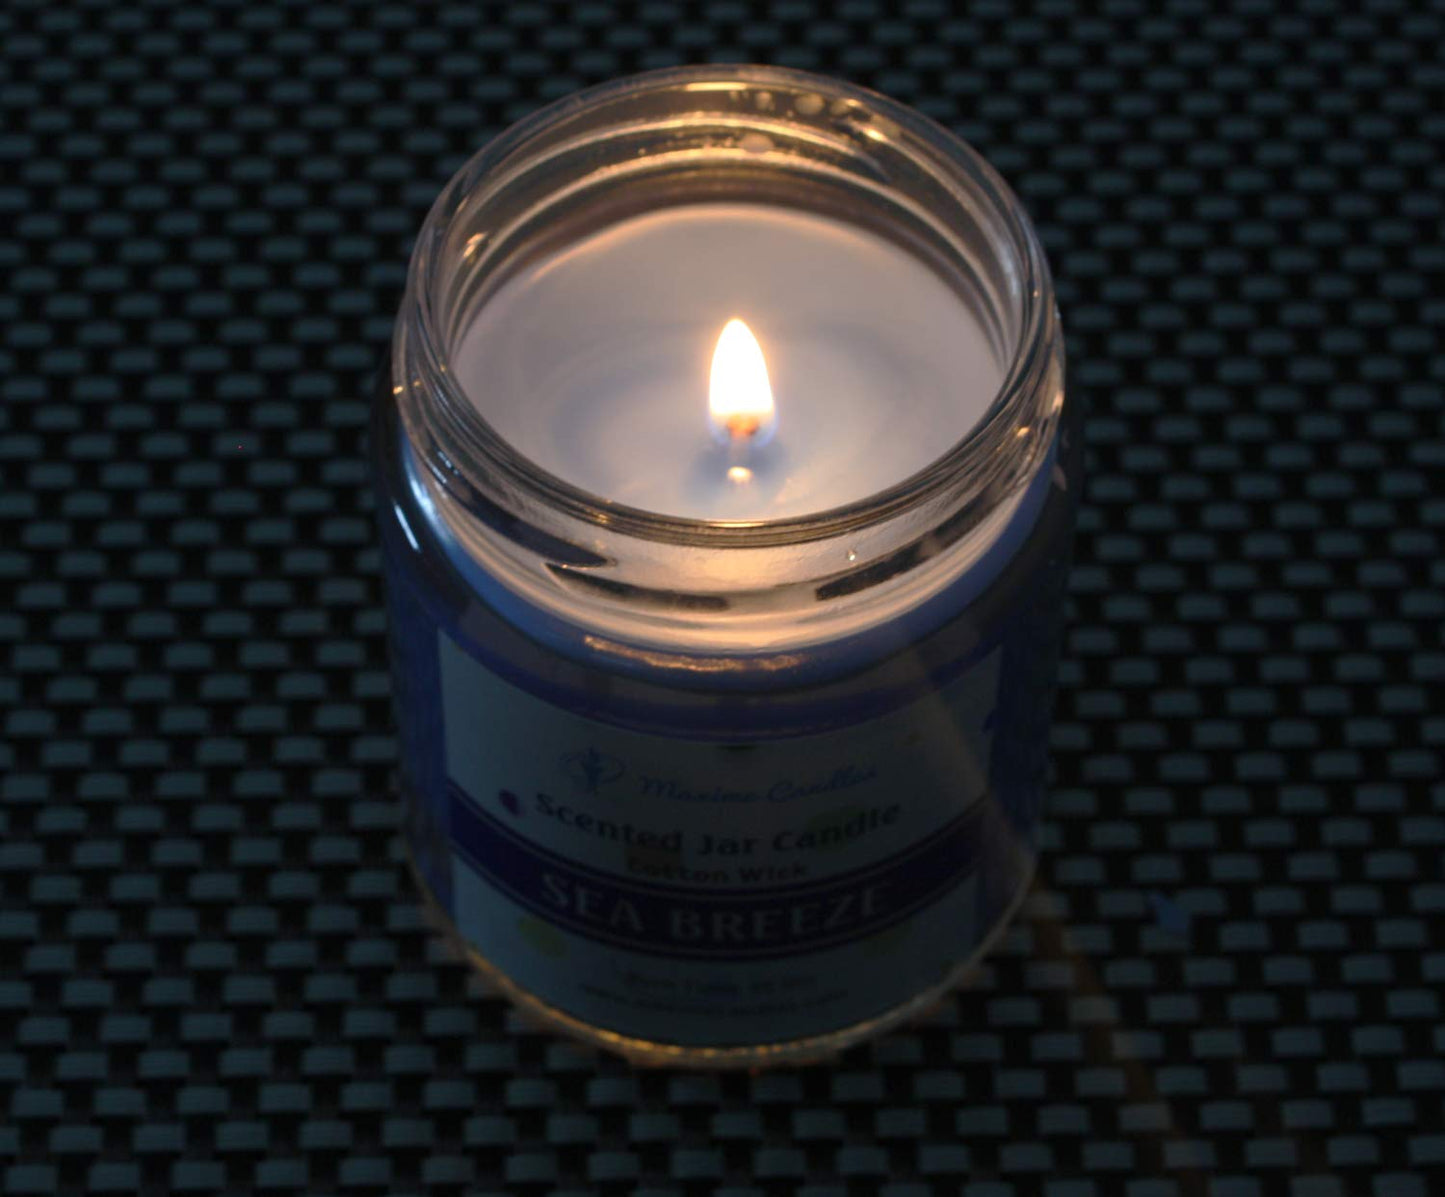 Seabreeze Fragranced Glass Jar Scented Candle